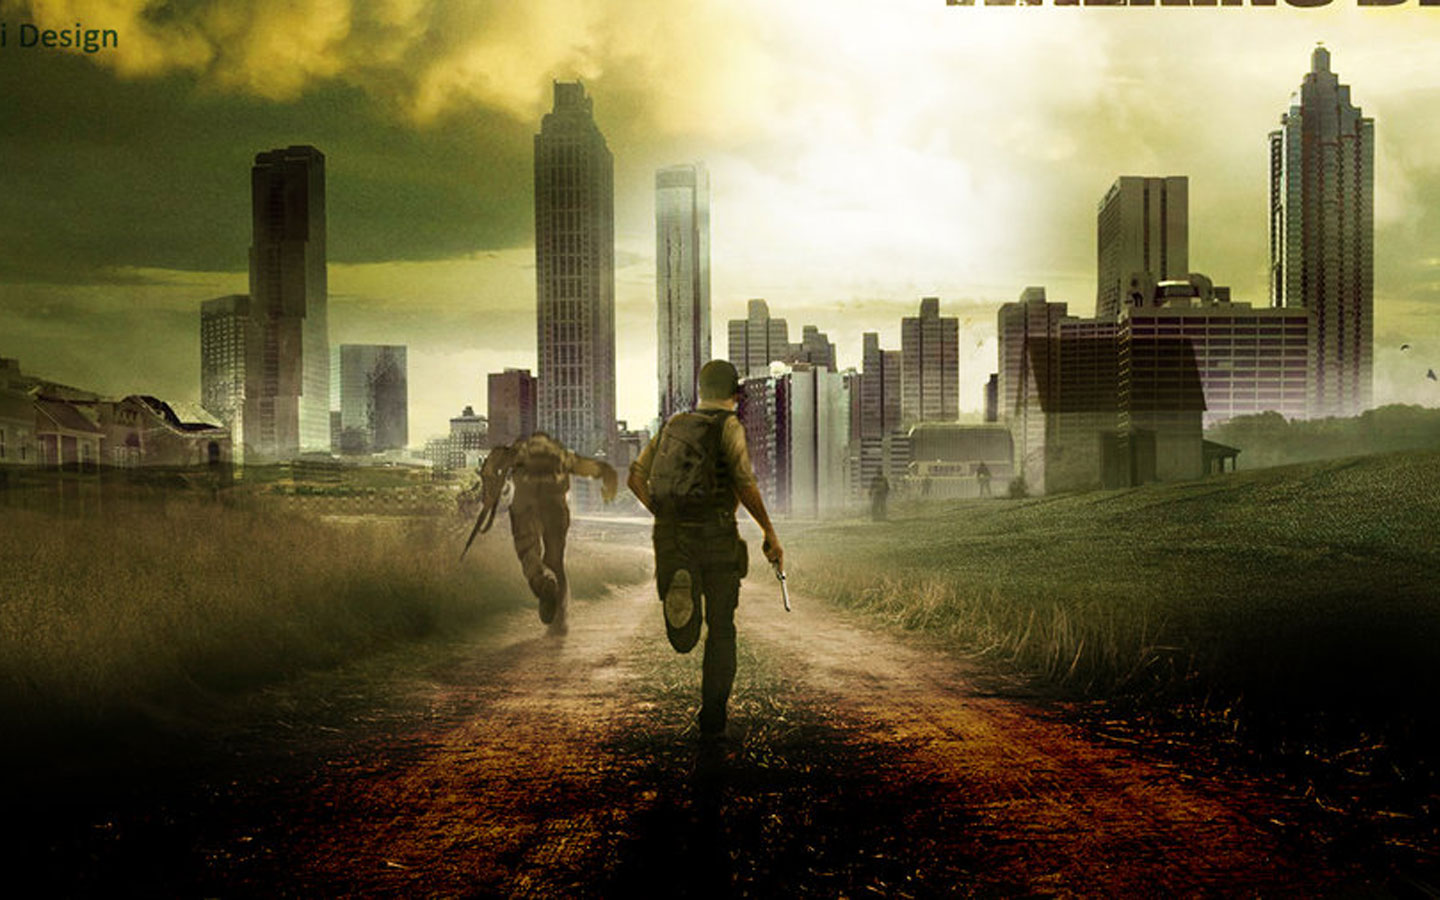 Super The Walking Dead Wallpaper Full HD Pictures